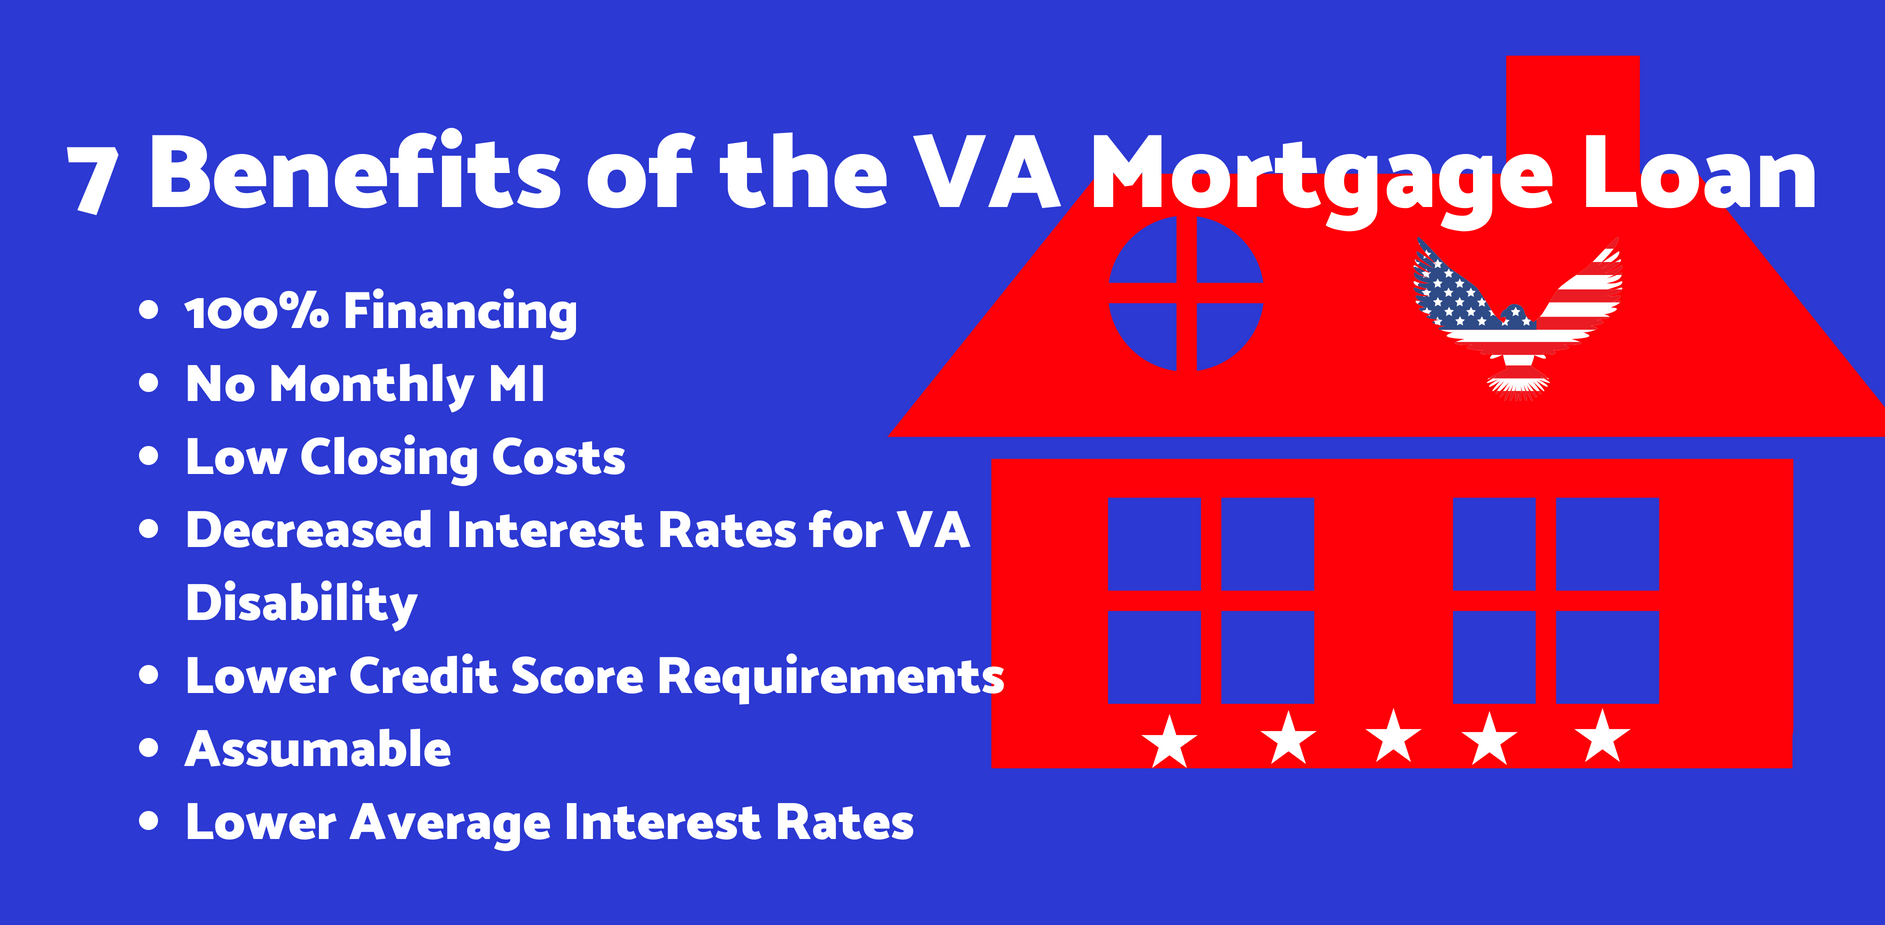 Benefits of buying a home with a VA mortgage loan